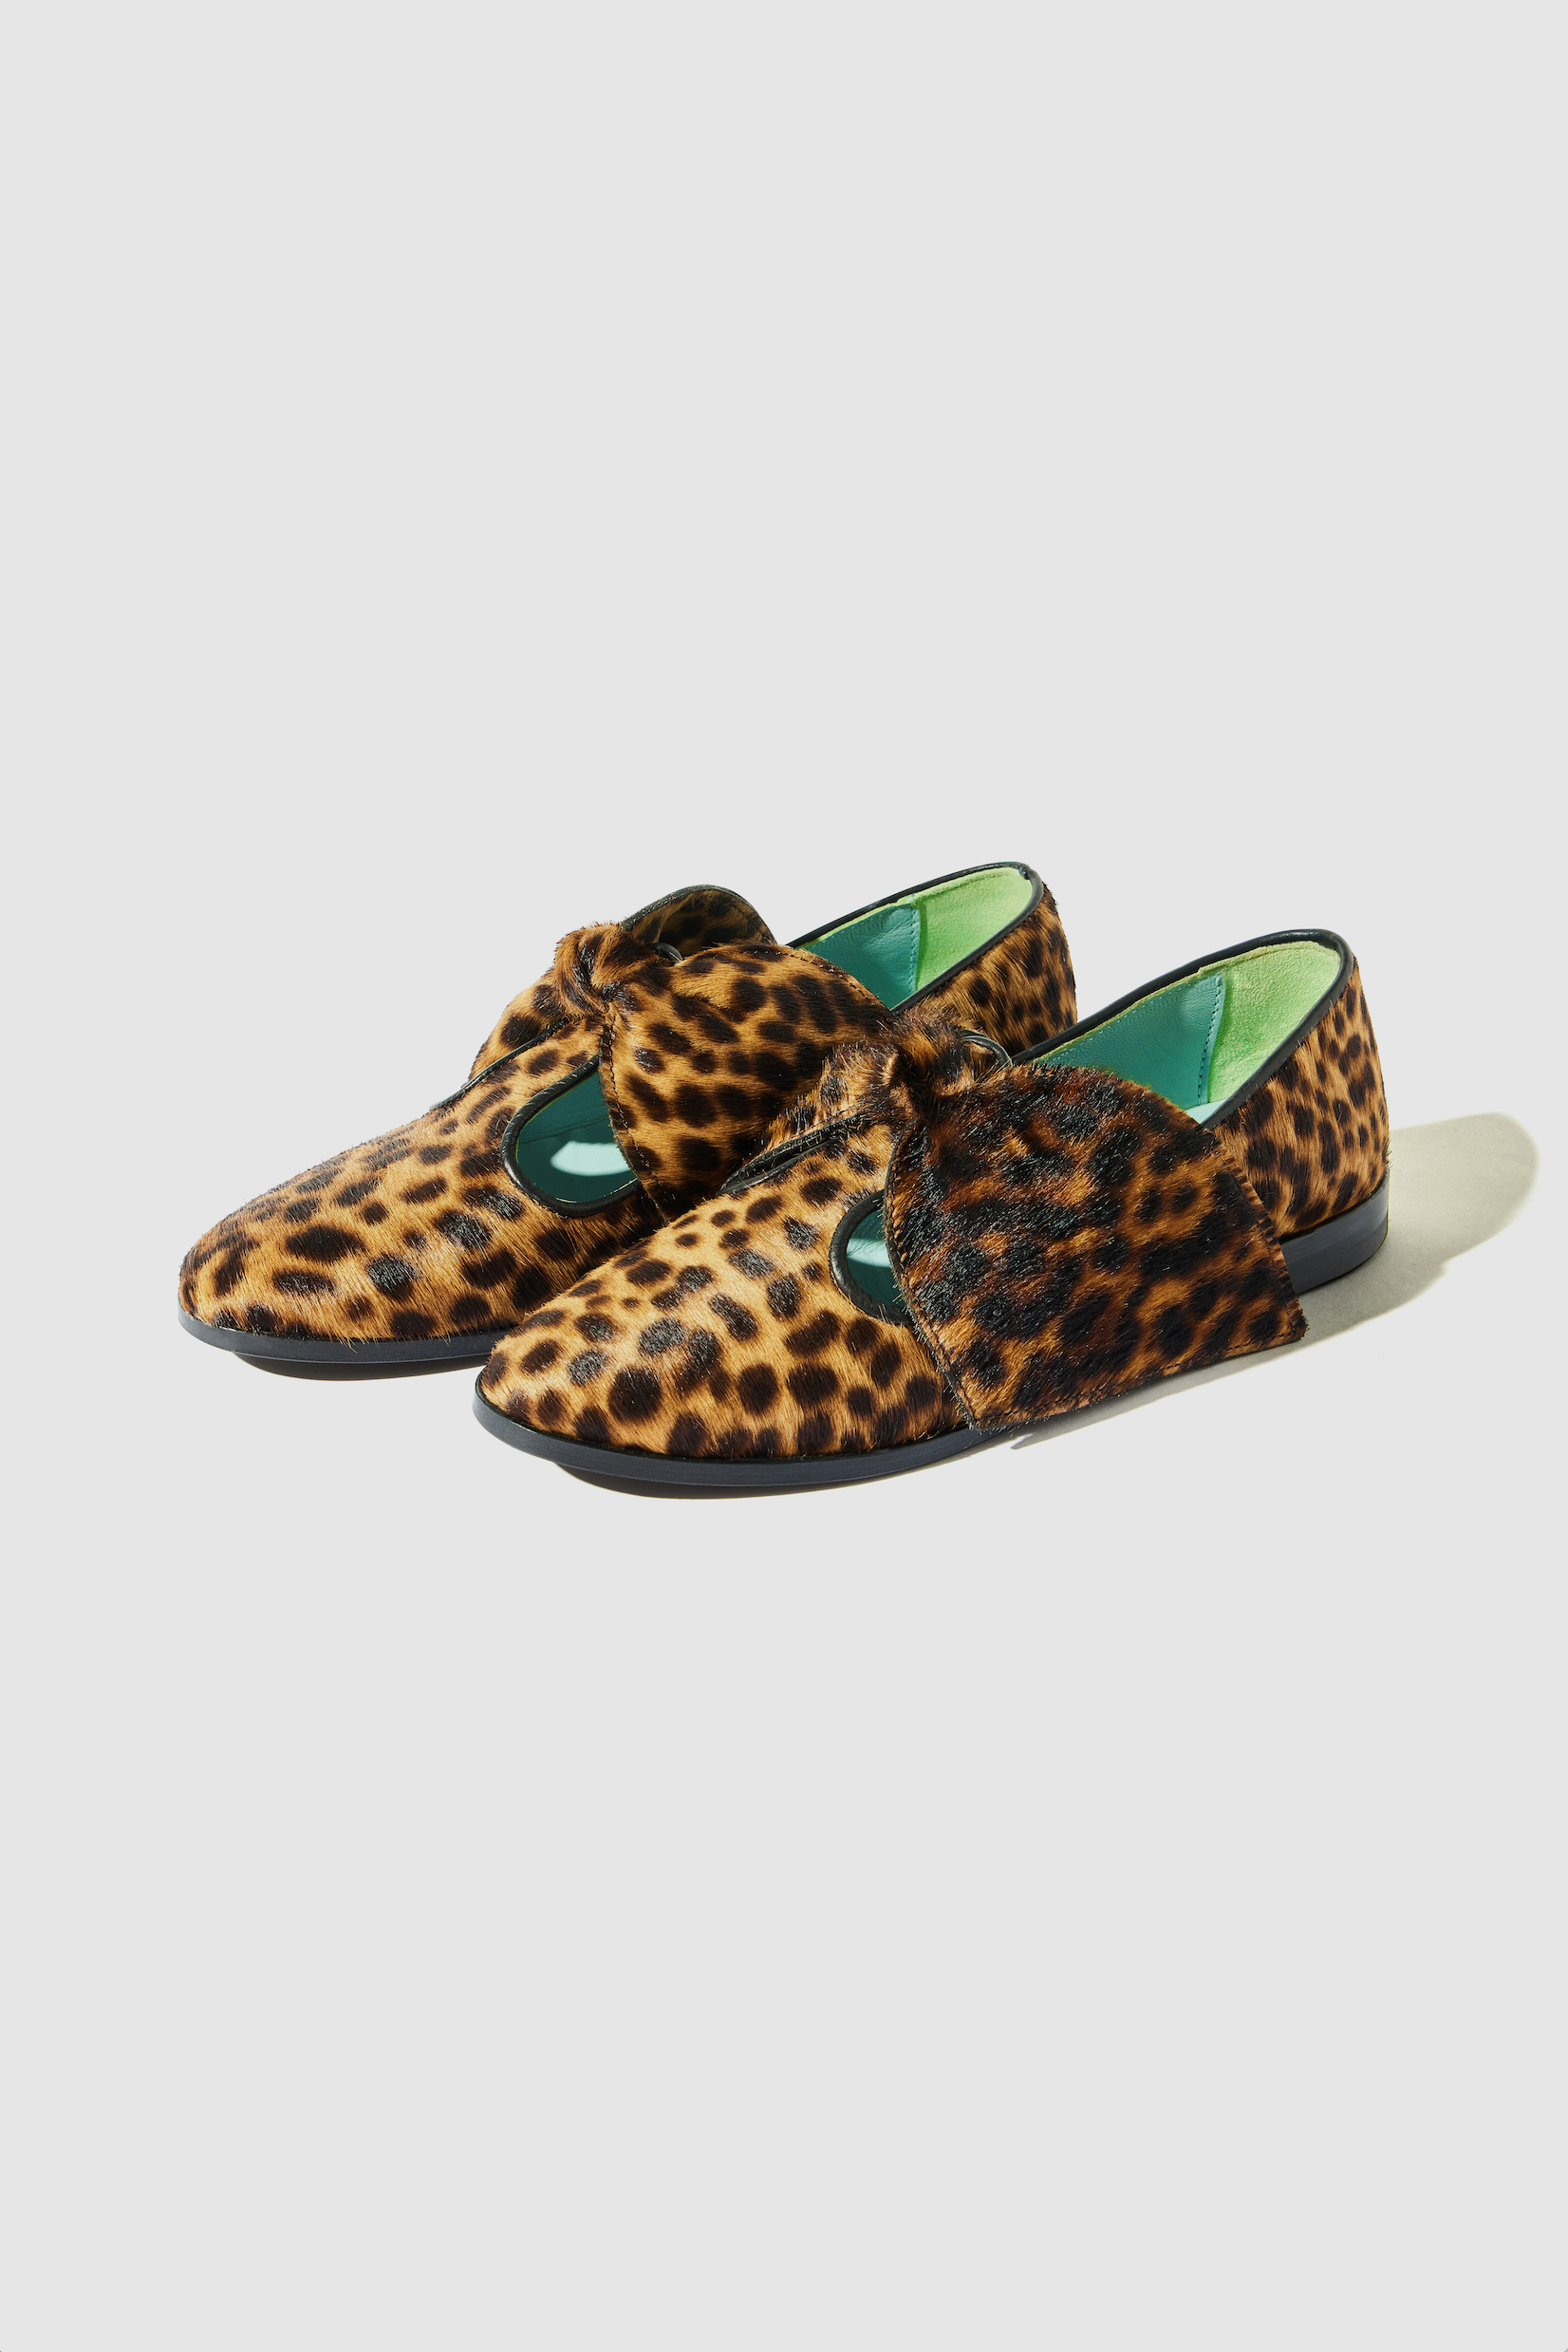 BB ballerina shoes in leopard printed leather